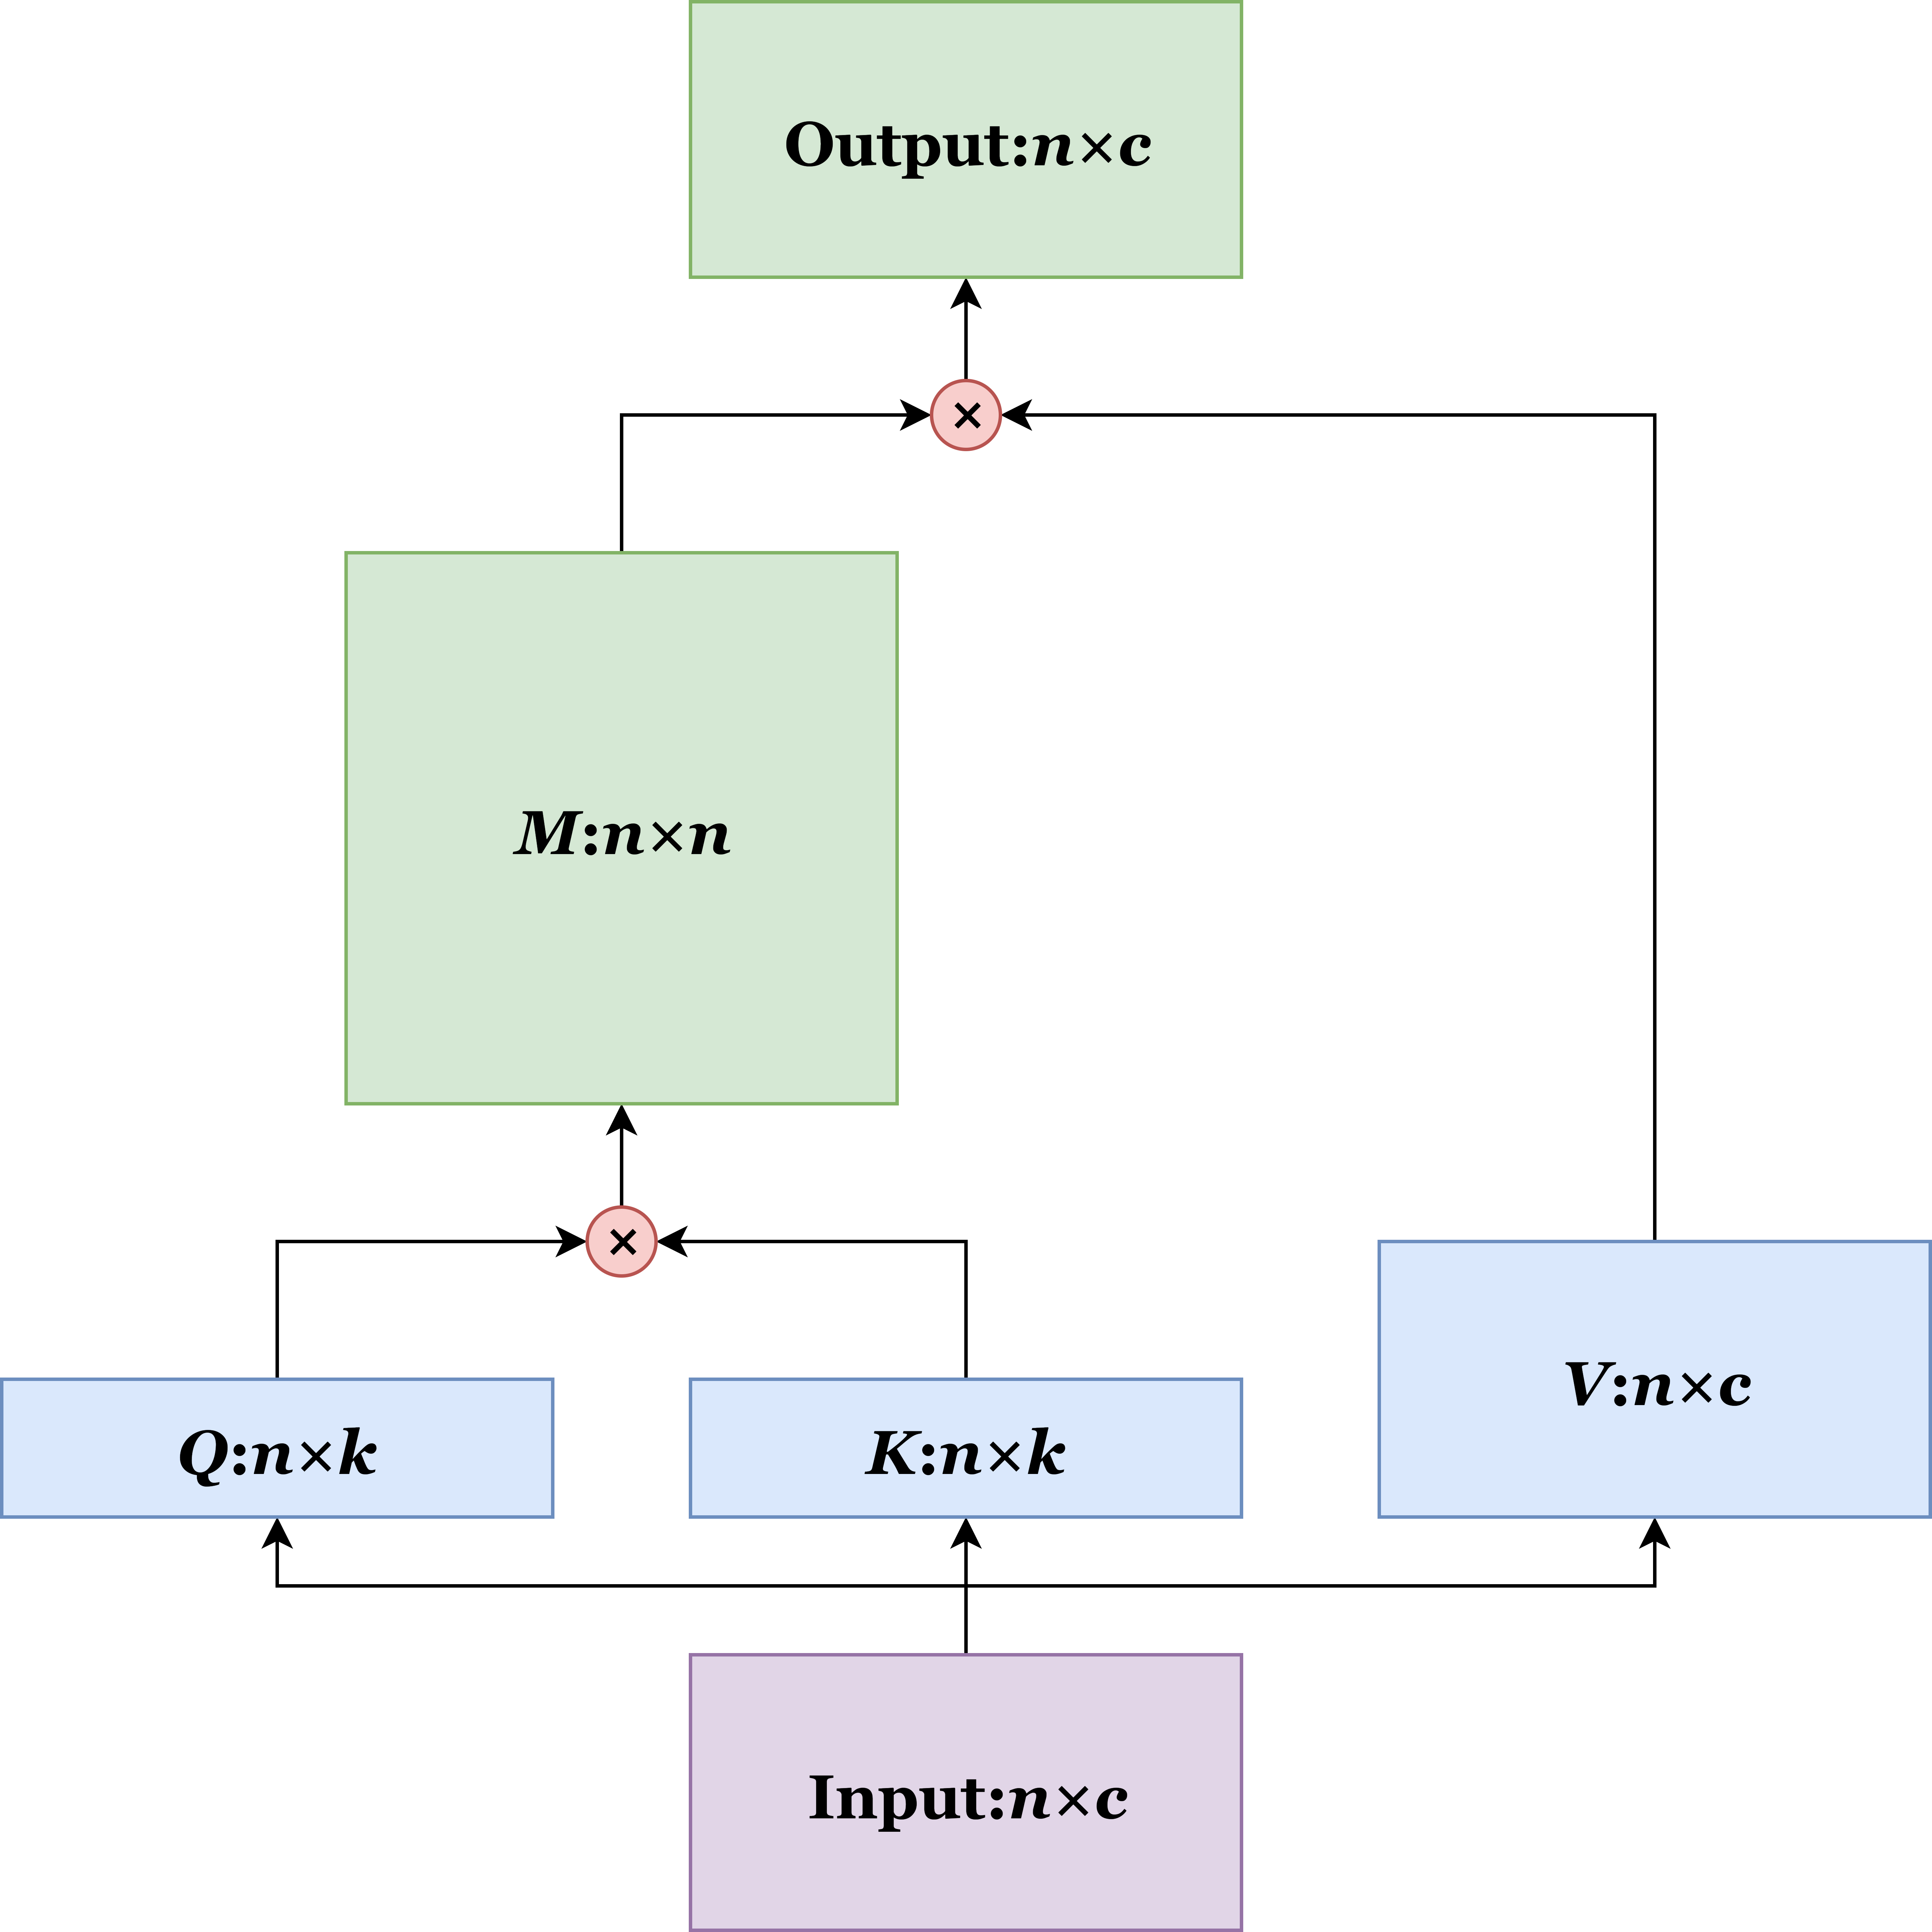 Illustration of the network architecture of conventional attention